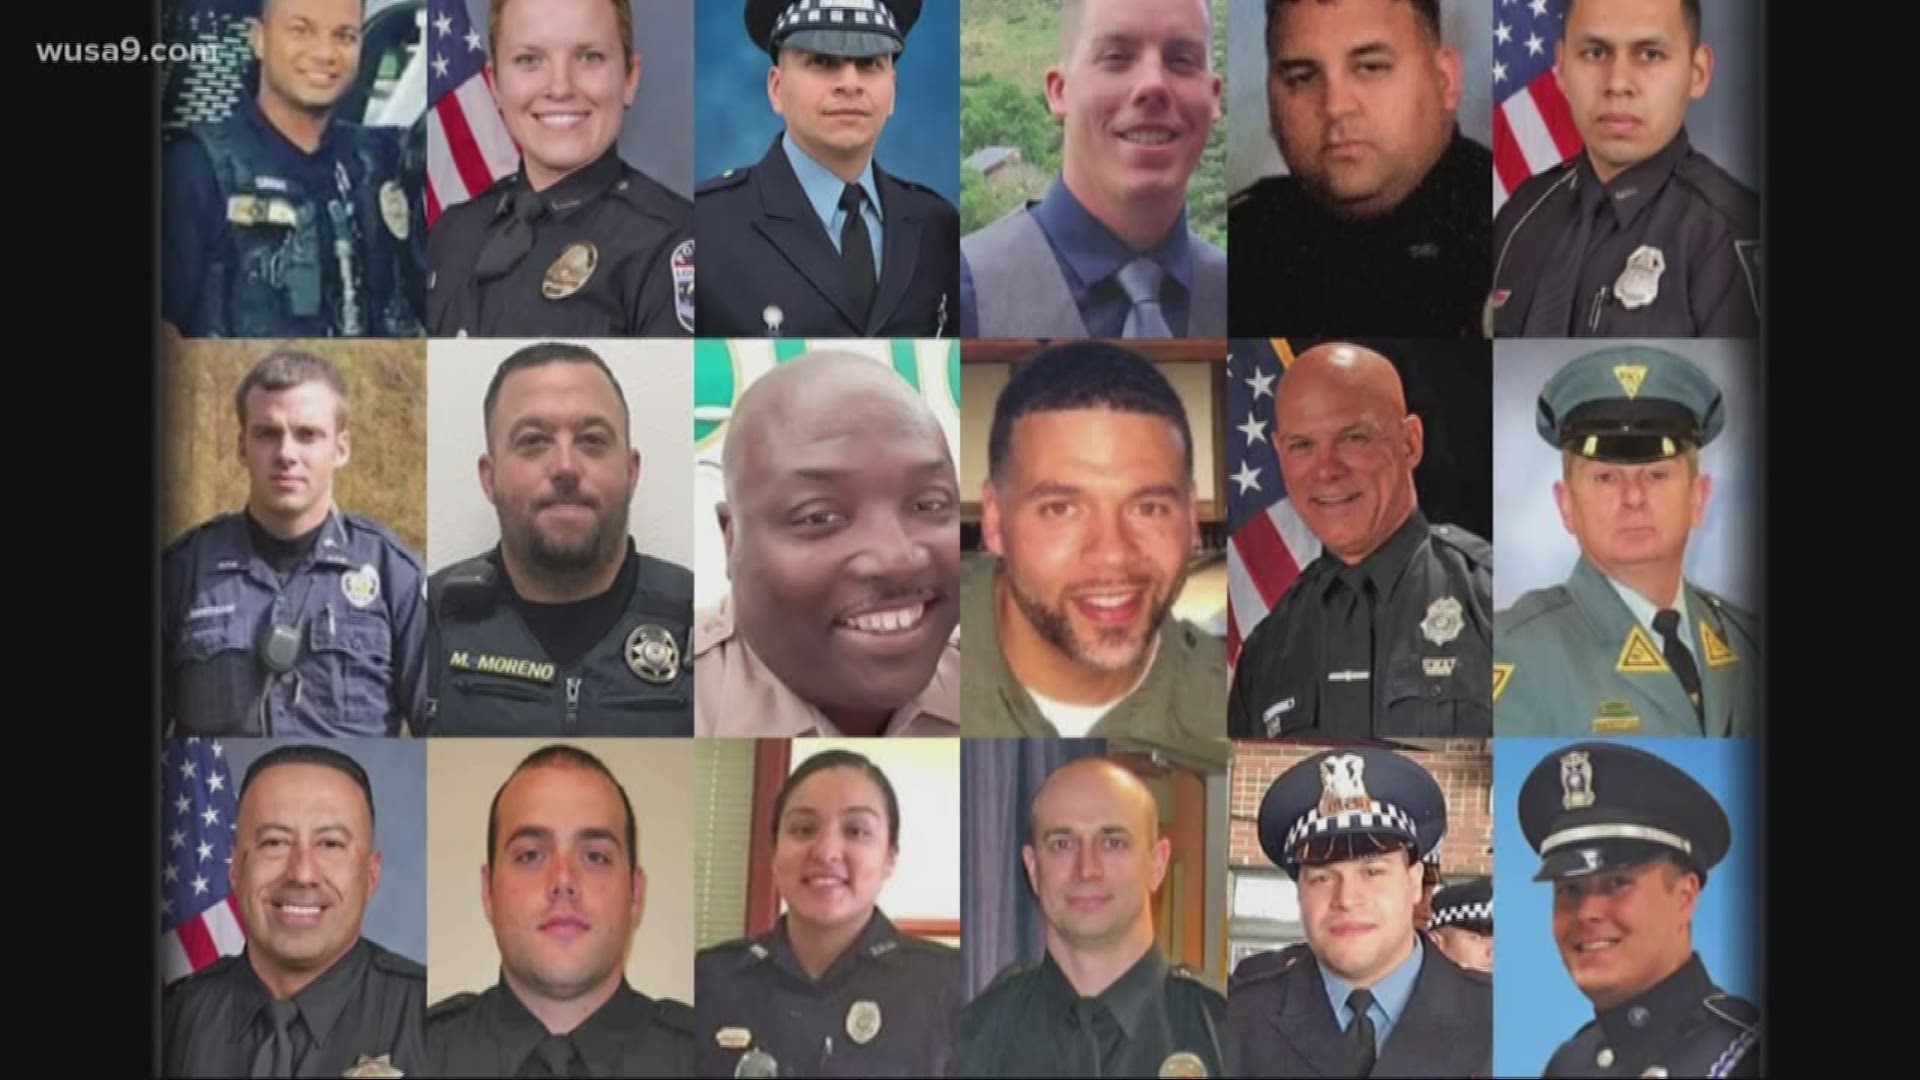 144 officers died in the line of duty in 2018